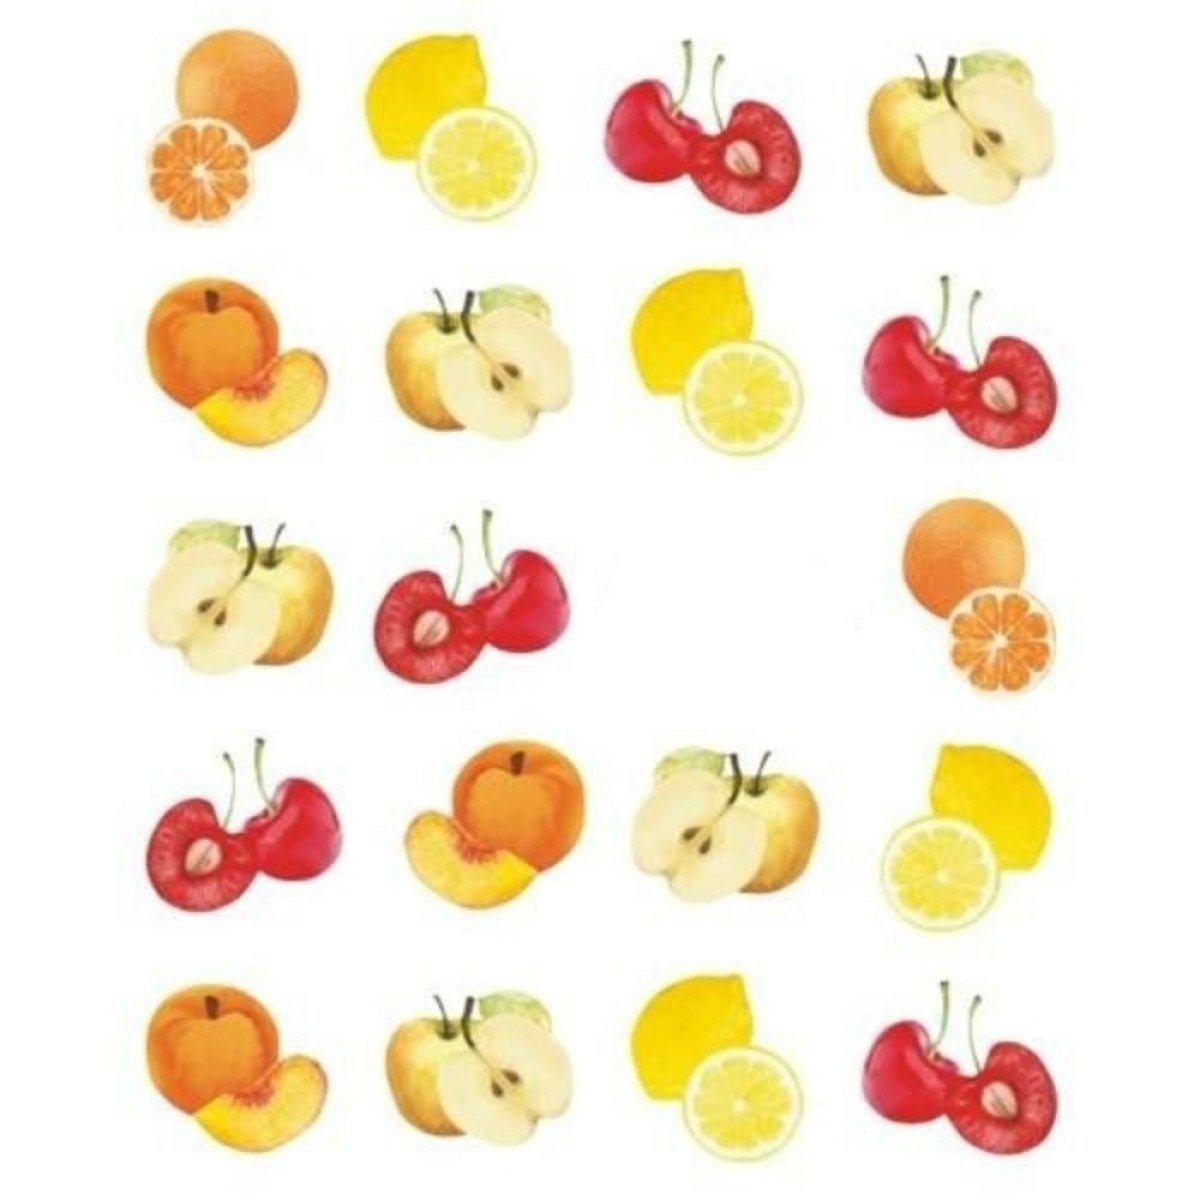 Strawberry Summer Cake & Fruit Stickers For Nails Nail Manicure Art - Stz-490 Sheet